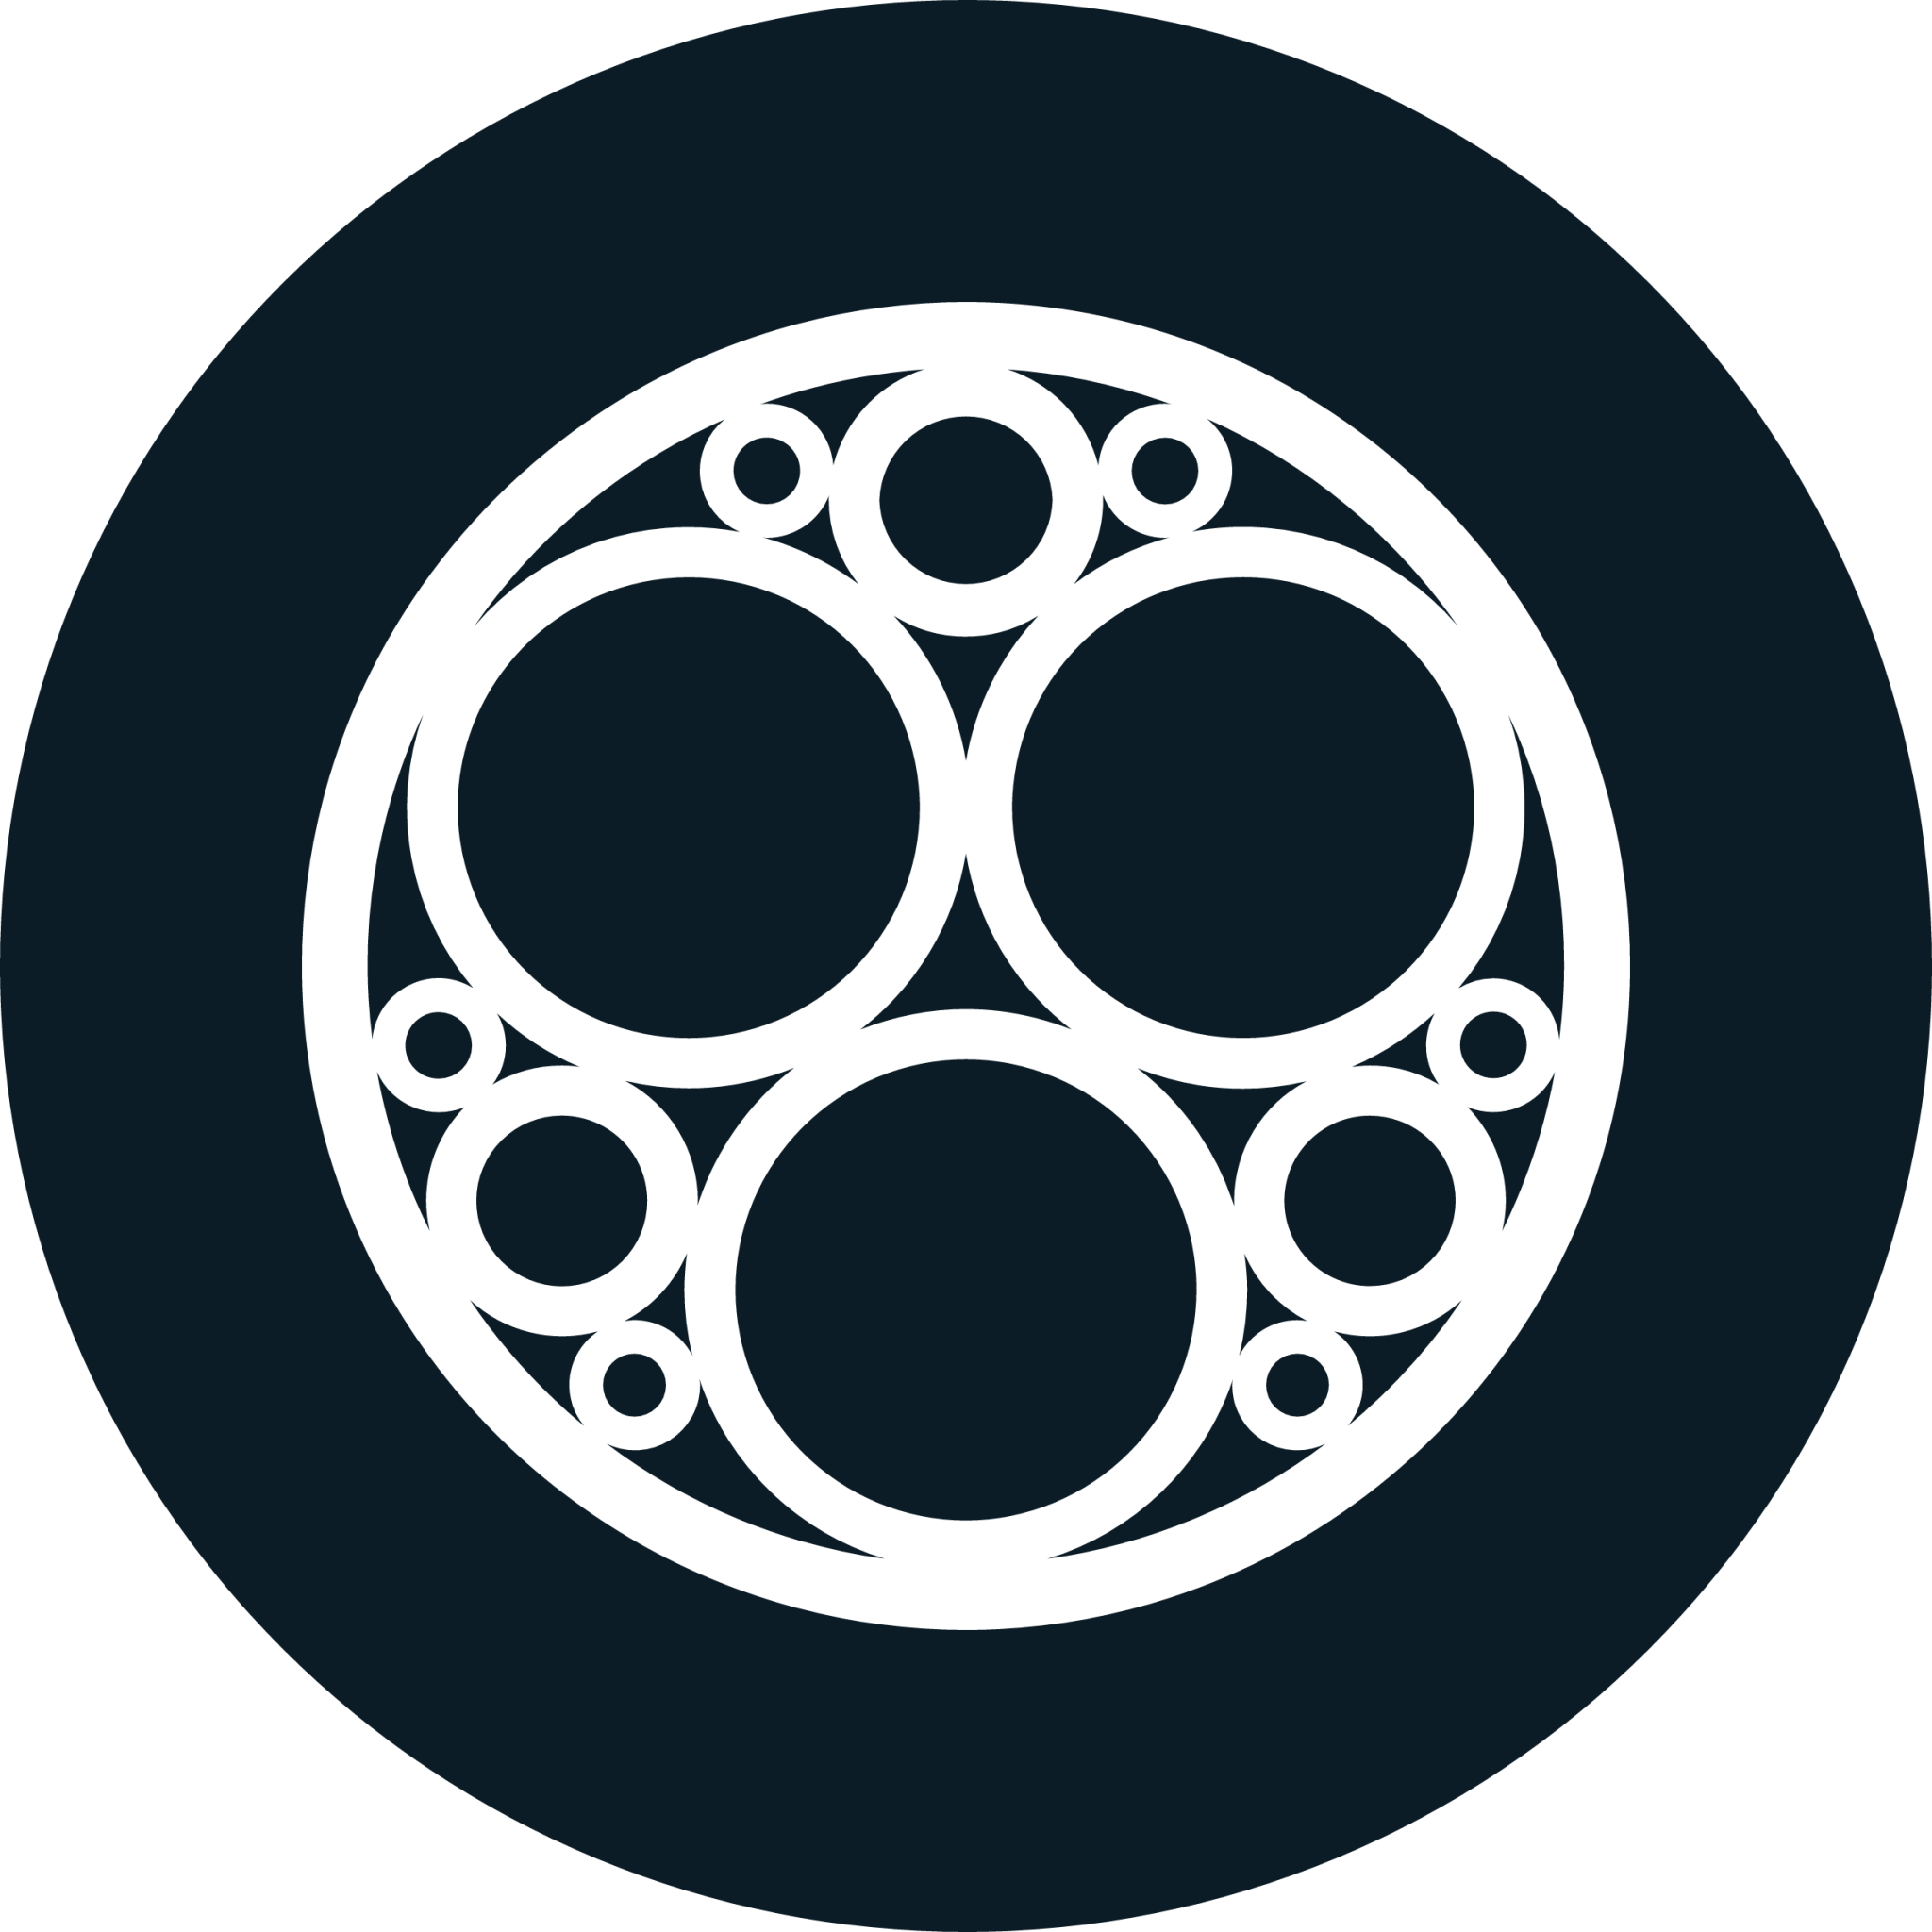 SONM Cryptocurrency icon